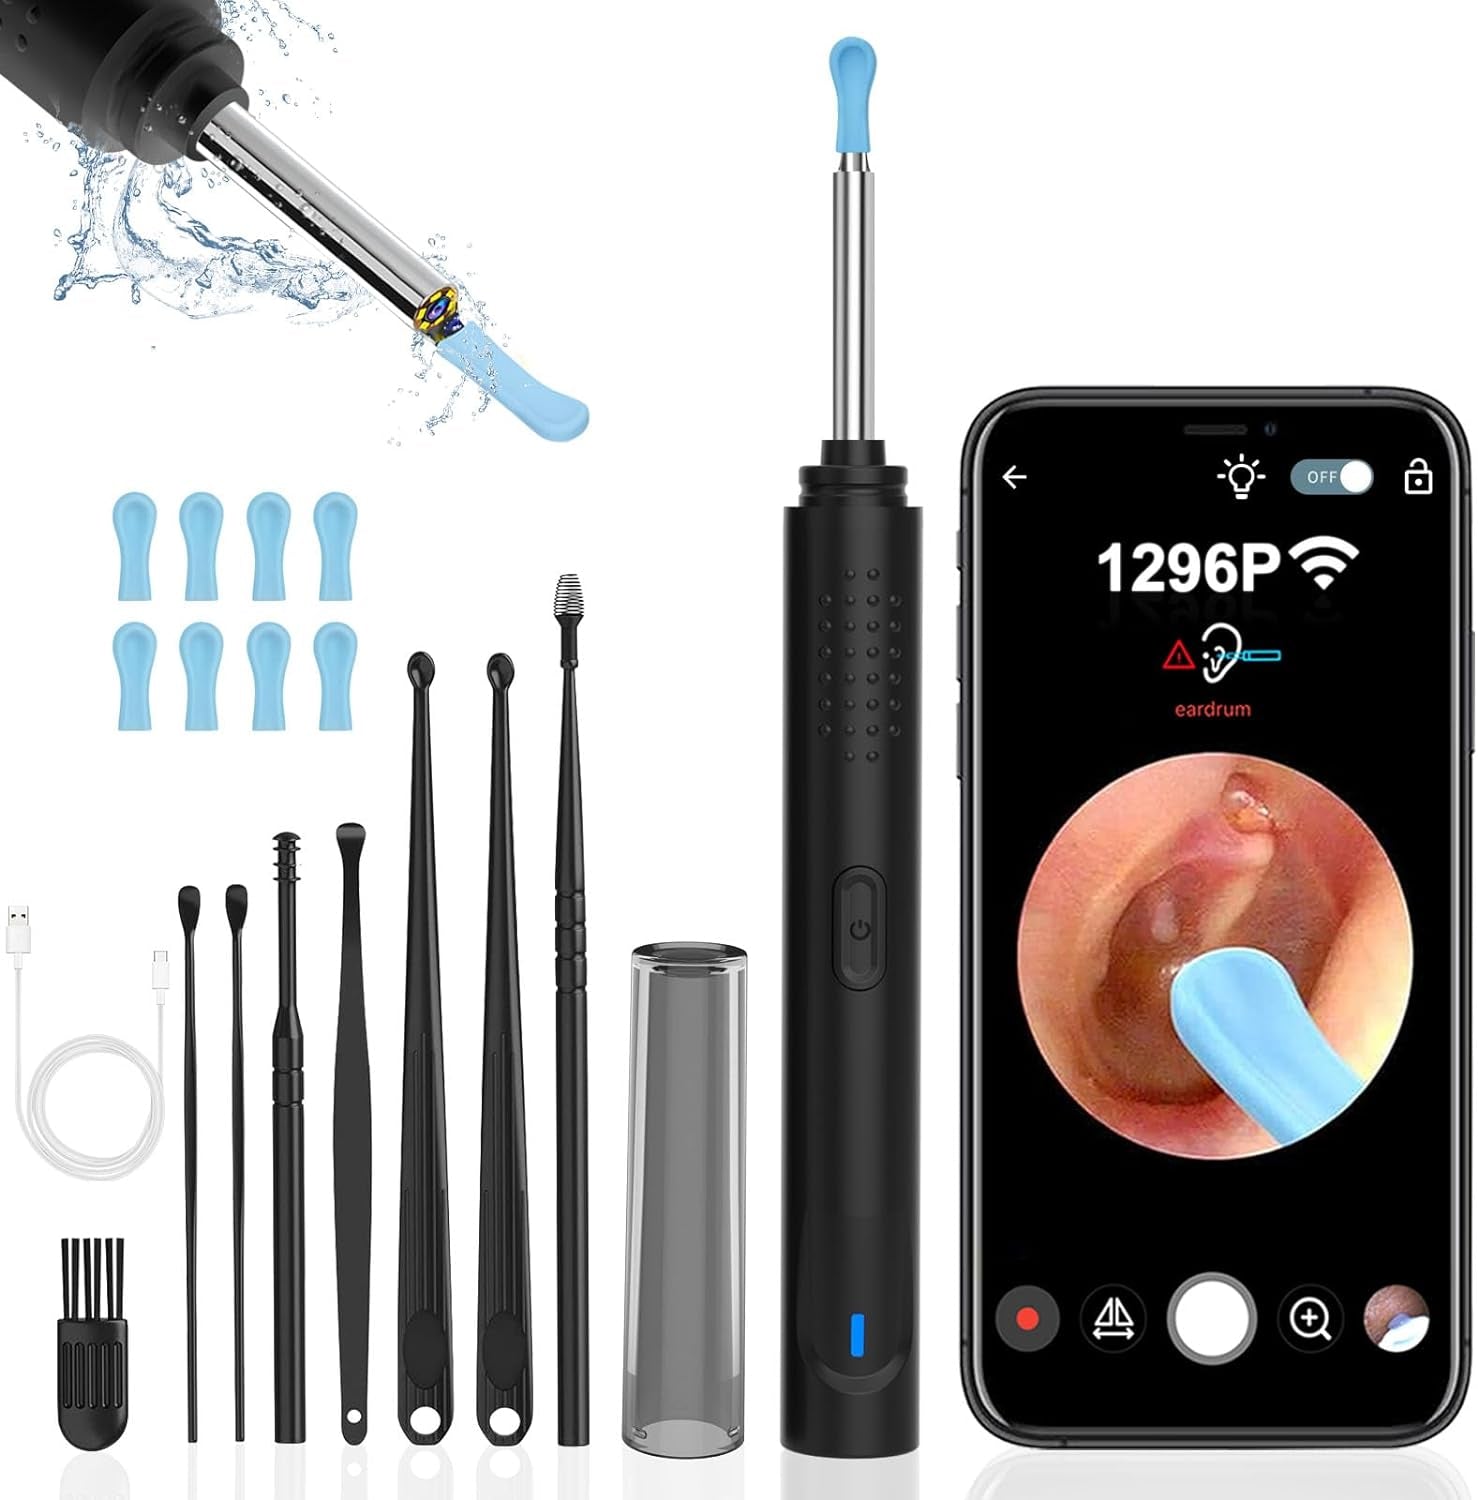 Ear Wax Removal, Ear Cleaner with Camera with 1296P, Earwax Removal Kit with 9 Ear Set and 8 Traditional Tools, Built-In Wifi IP67 Waterproof, Ear Cleaning Kit for Iphone, Ipad, Android